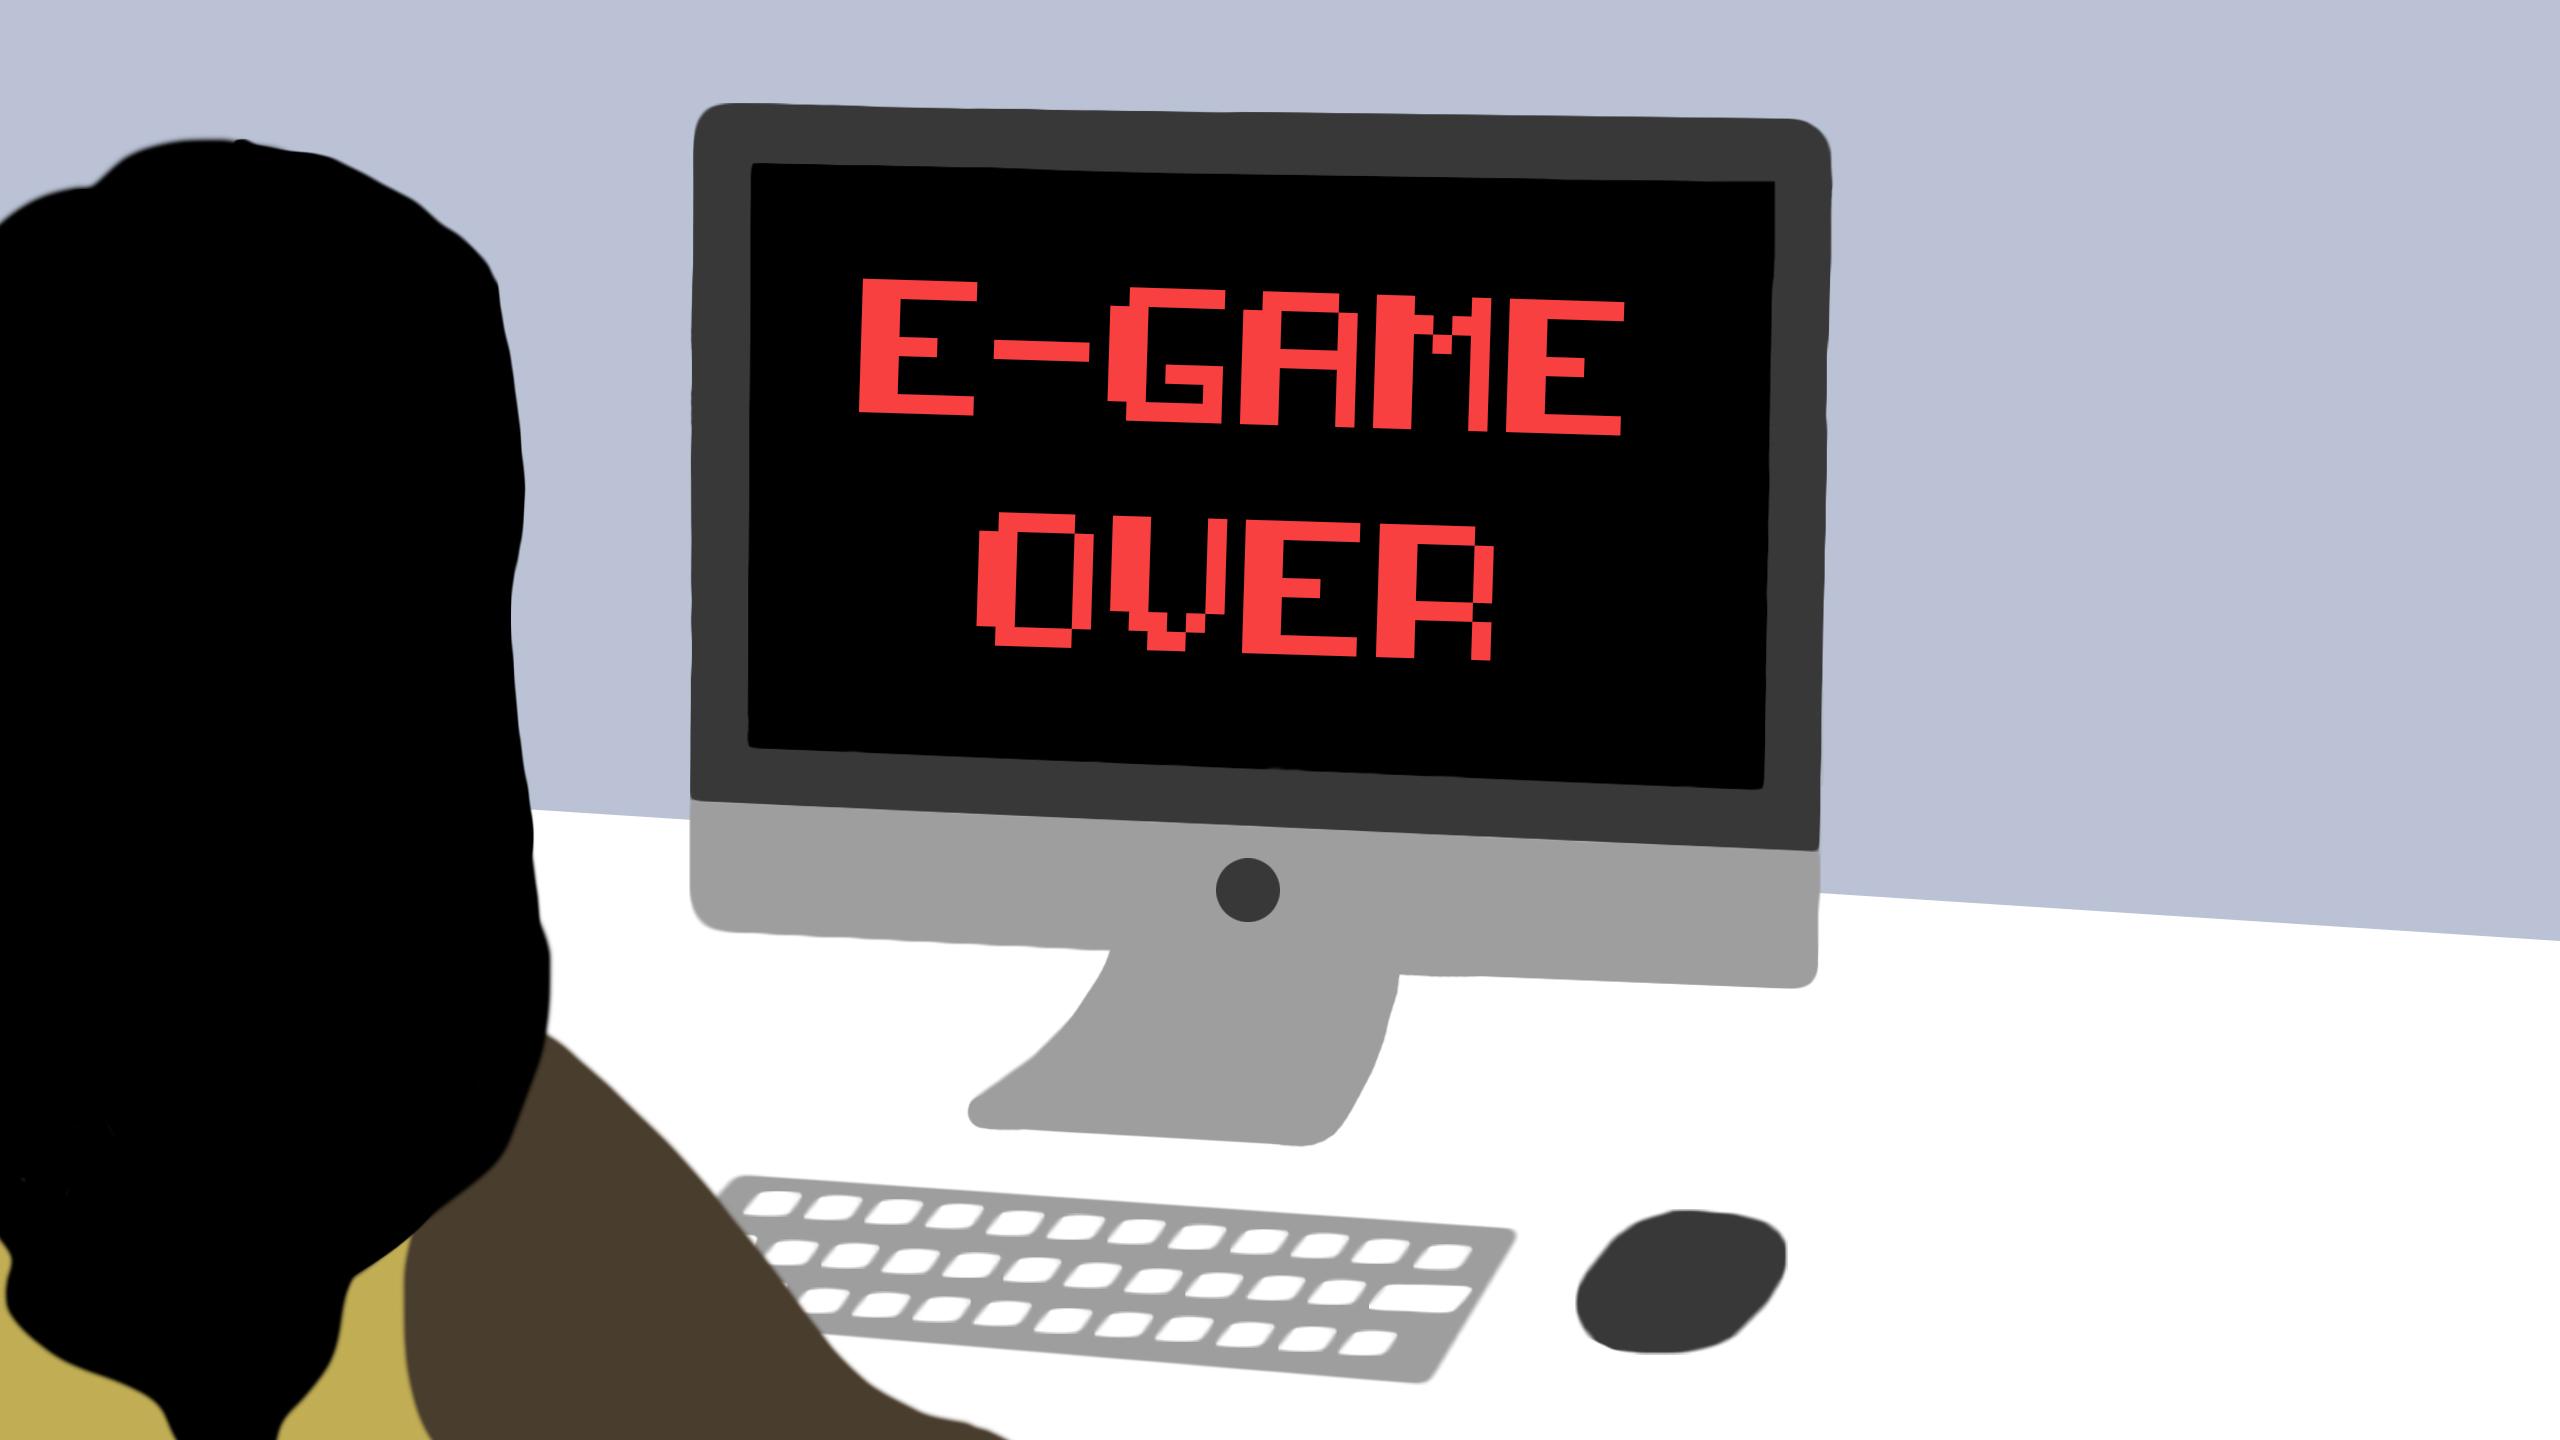 An illustration of a girl sitting at a computer that says "E-Game Over" in 8-bit font